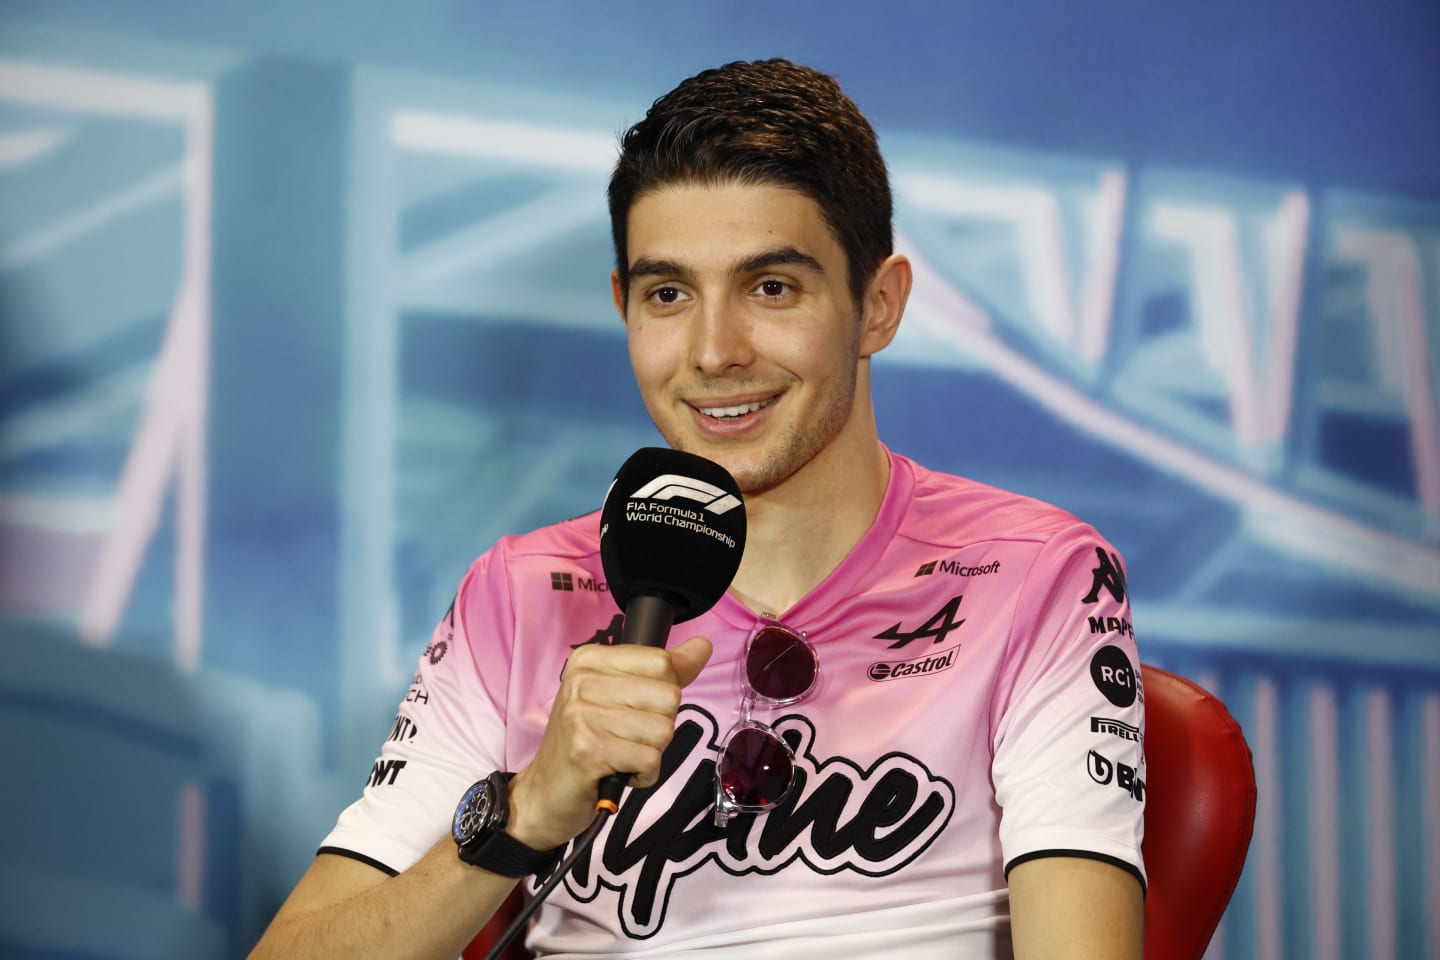 MIAMI, FLORIDA - MAY 06: Esteban Ocon of France and Alpine F1 talks in the Drivers Press Conference prior to practice ahead of the F1 Grand Prix of Miami at the Miami International Autodrome on May 06, 2022 in Miami, Florida. (Photo by Jared C. Tilton/Getty Images)